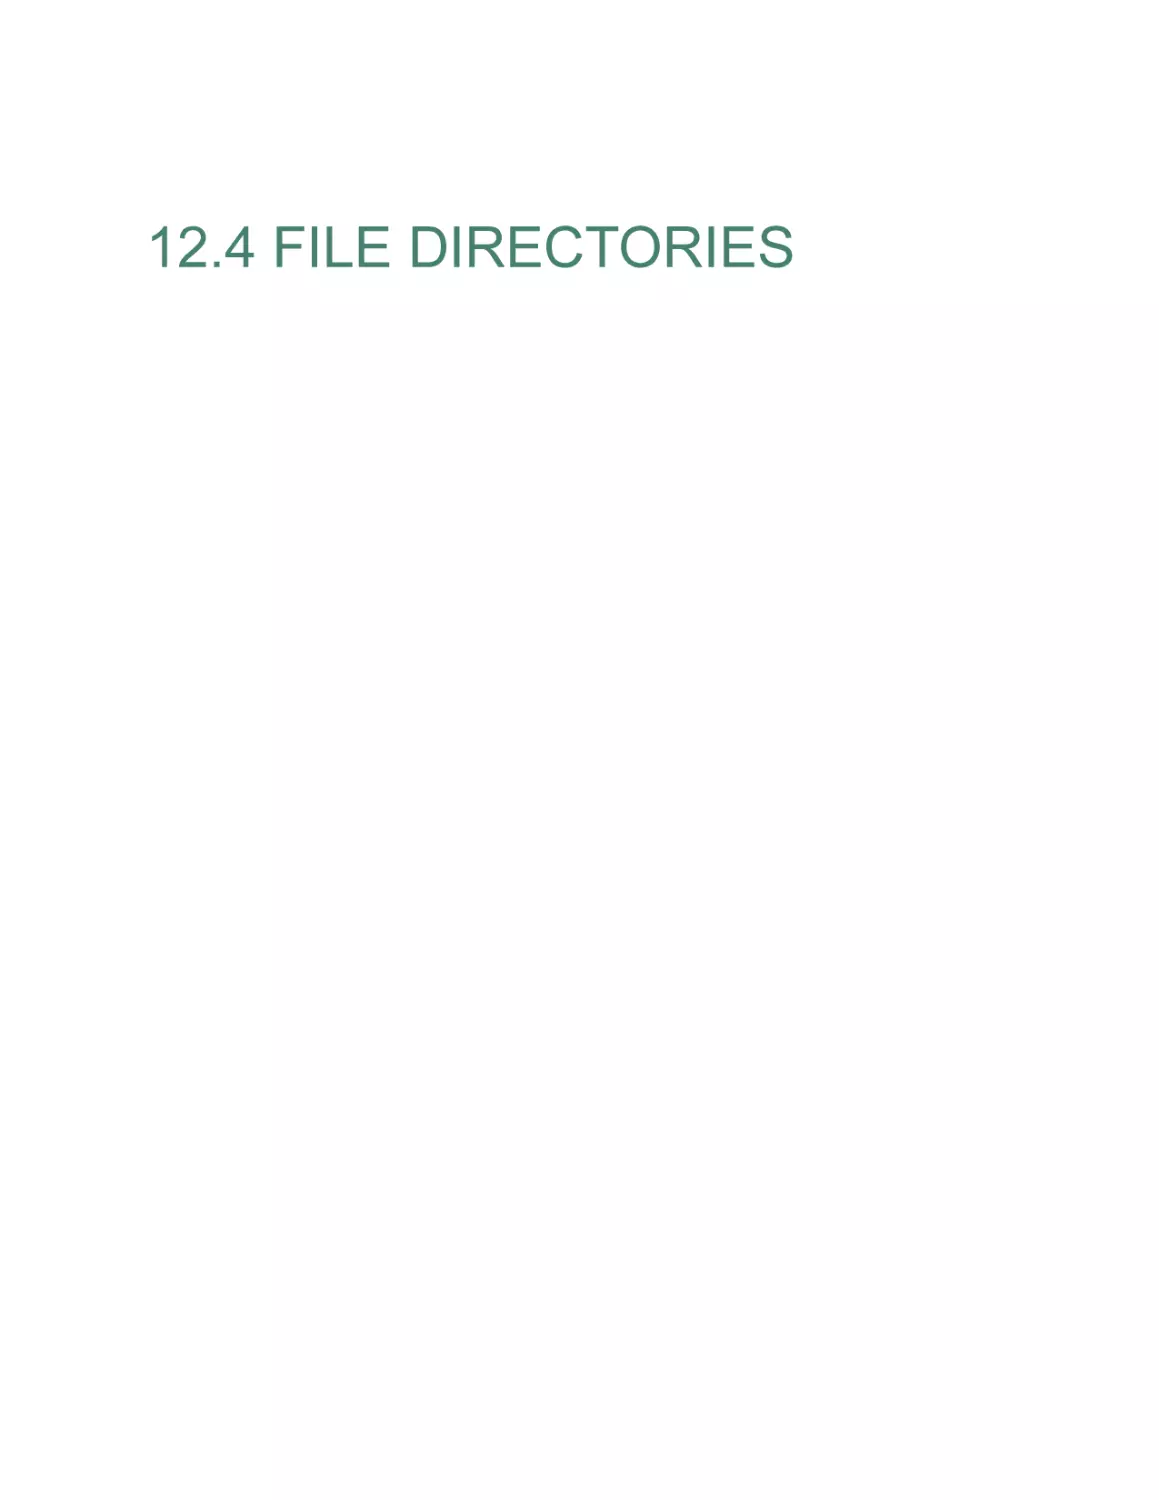 12.4 FILE DIRECTORIES